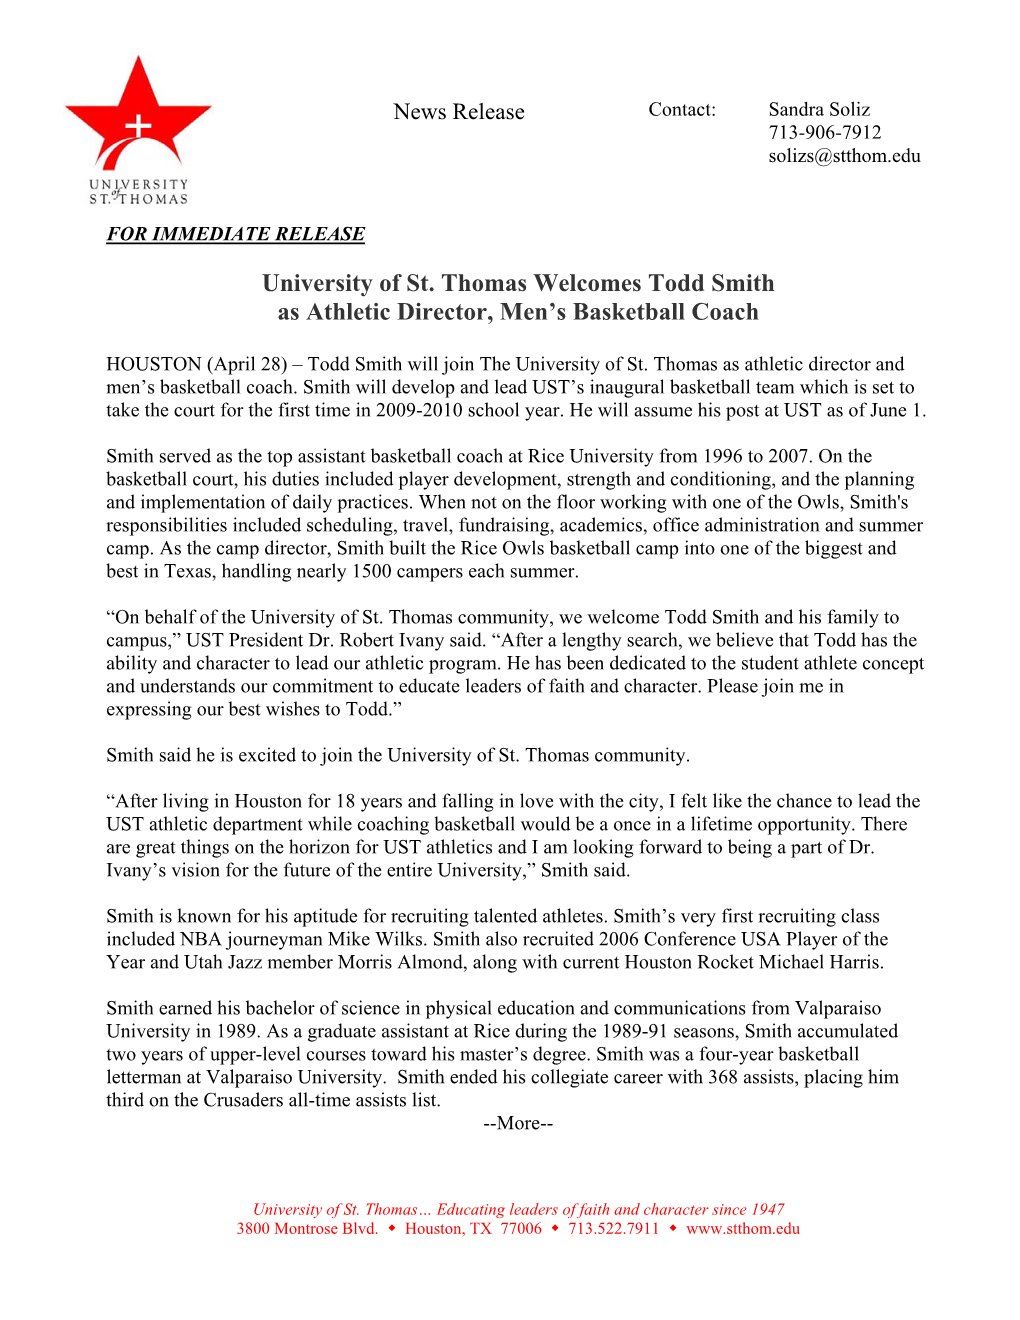 University of St. Thomas Welcomes Todd Smith As Athletic Director, Men’S Basketball Coach